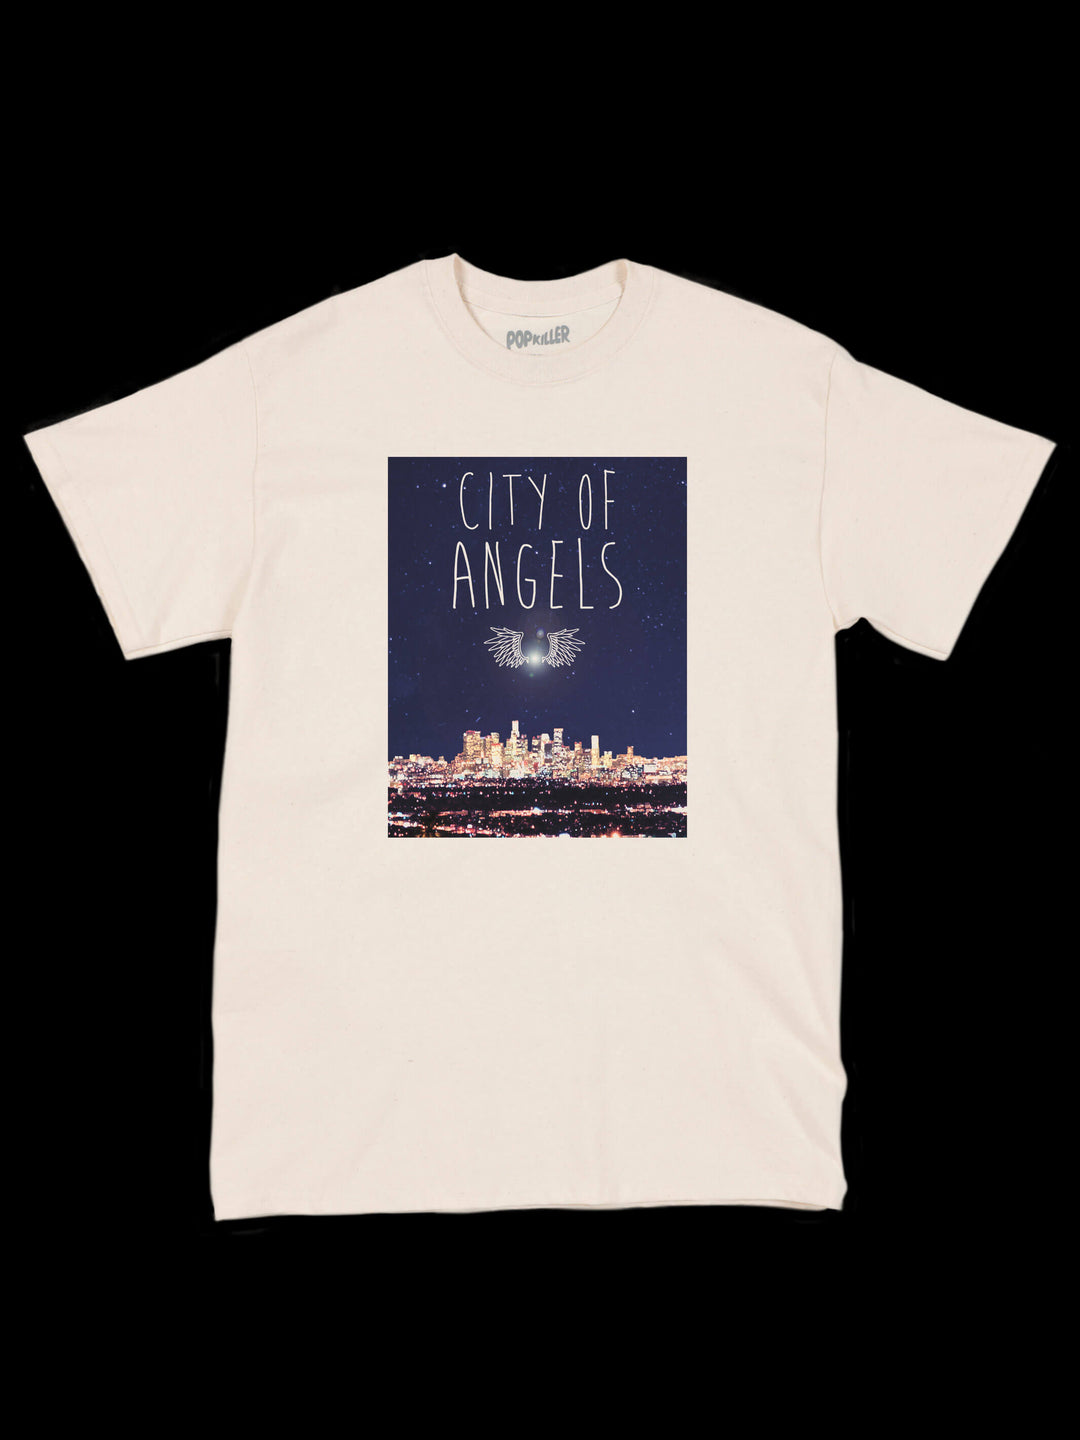 Los Angeles Angels T-Shirts in Los Angeles Angels Team Shop 